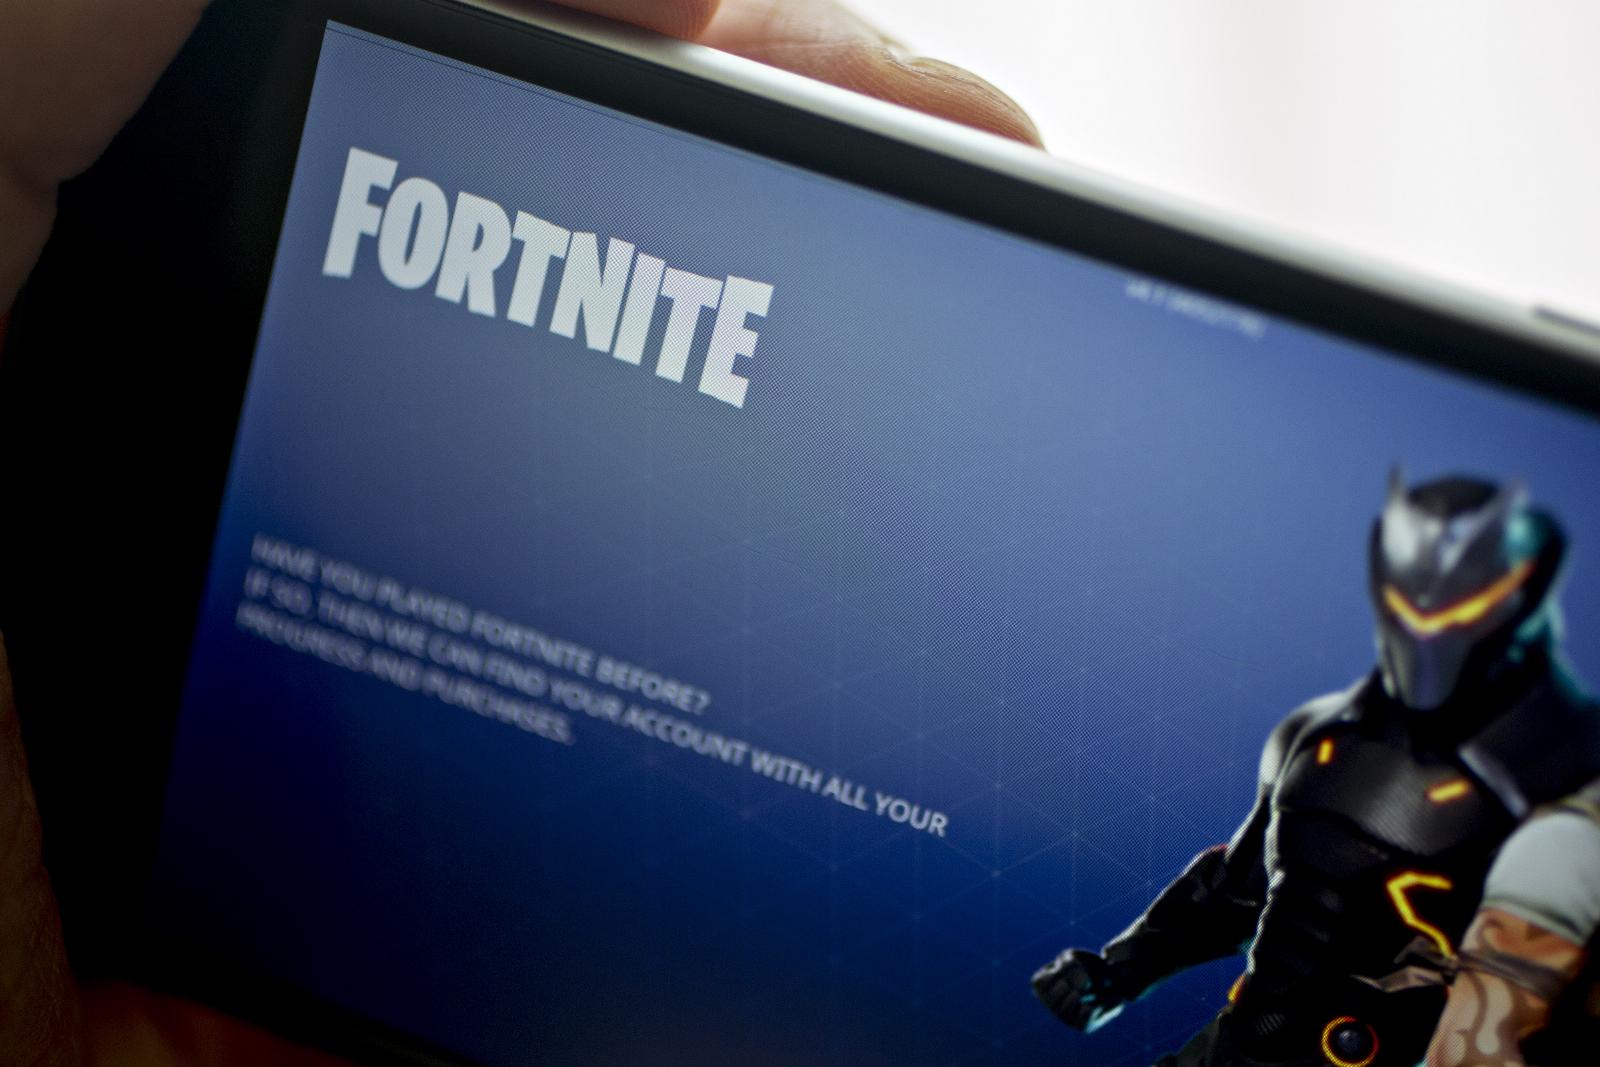 What to know about Fortnite maker Epic Games’ antitrust battle with Google, starting today